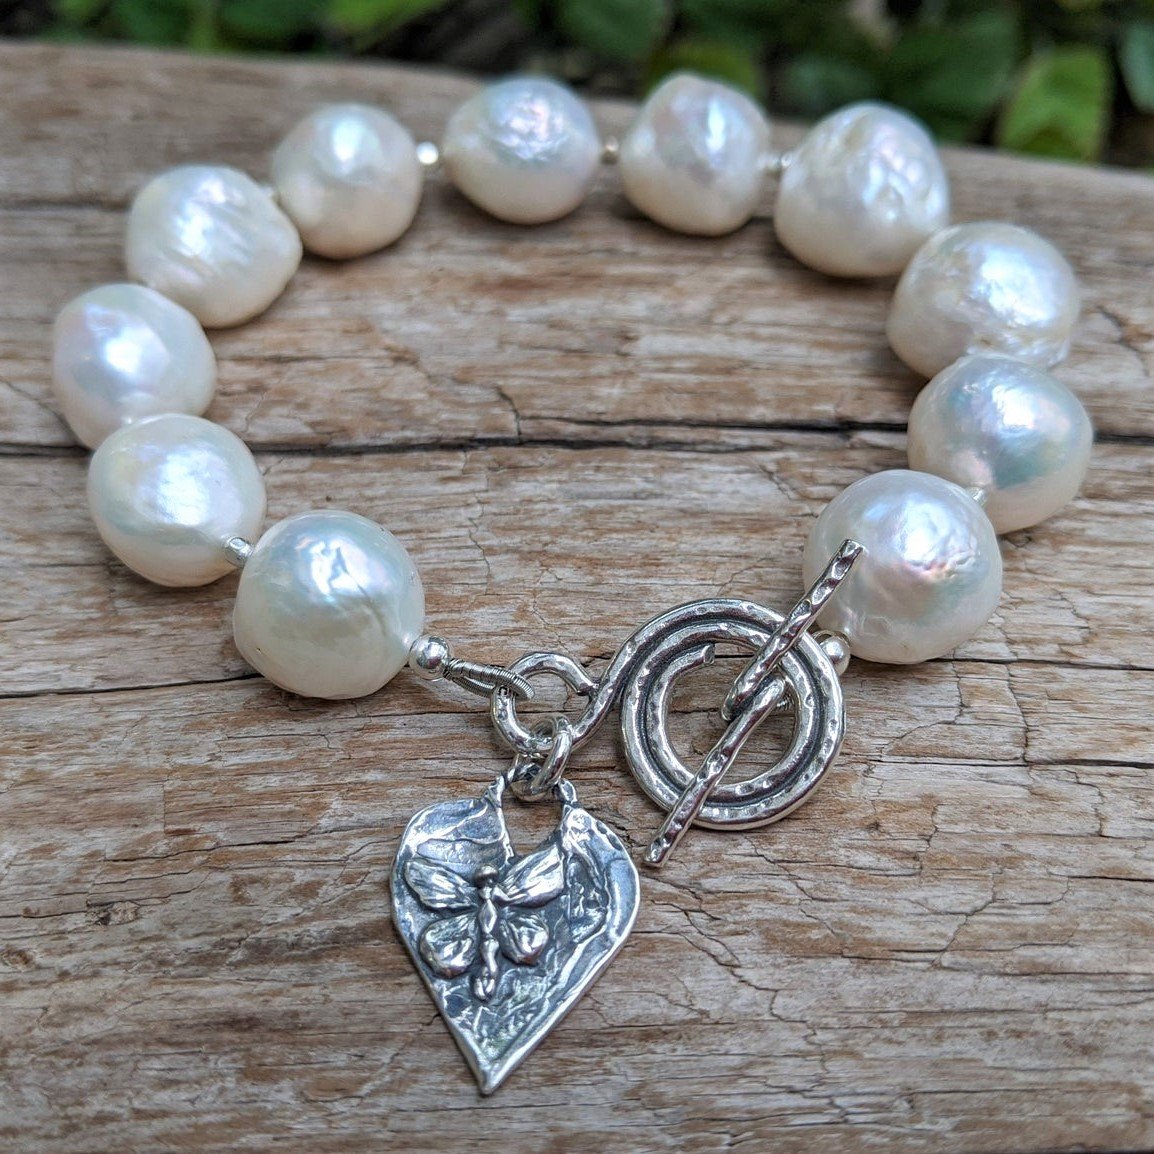 Large white Edison pearl bracelet with sterling silver toggle and heart charm by Aurora Creative Jewellery